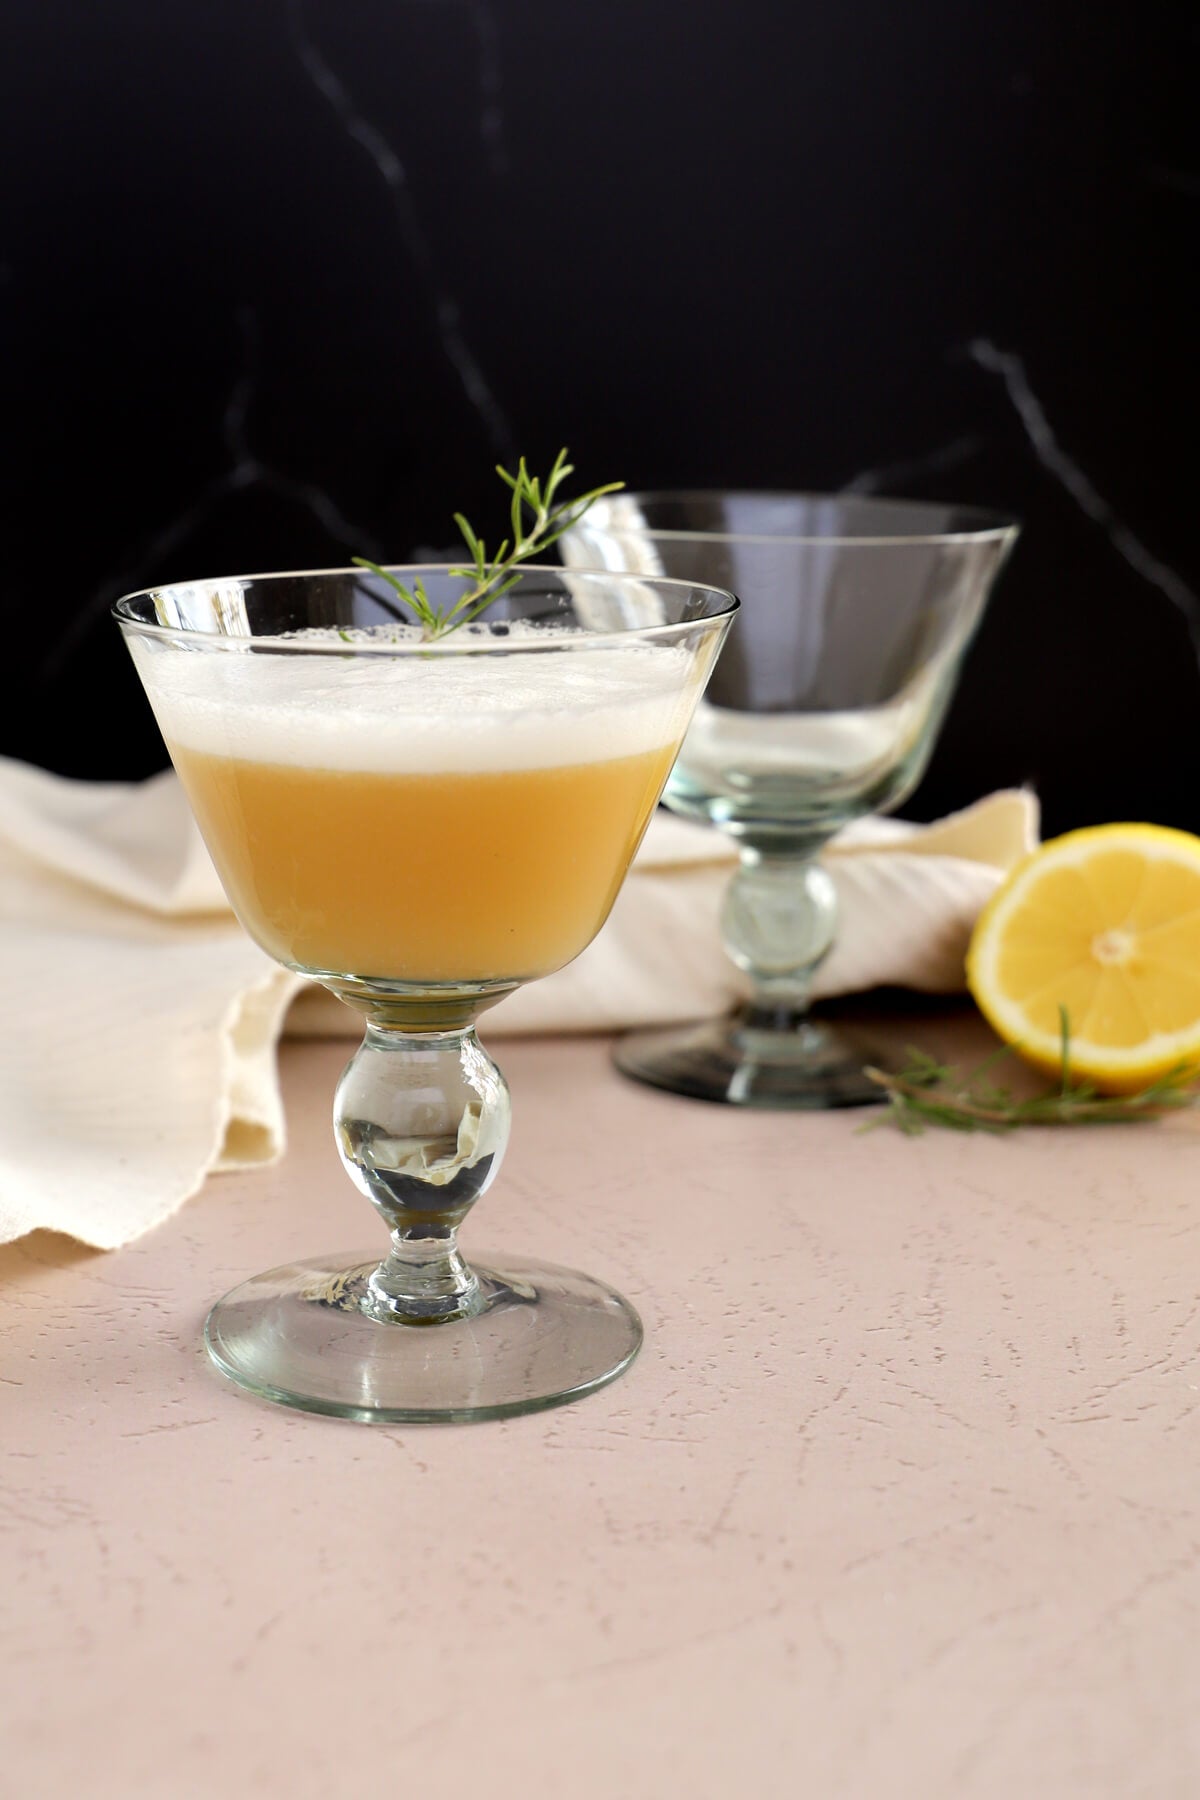 Whiskey sour cocktail recipe with egg white, in recycled glass coupe glasses